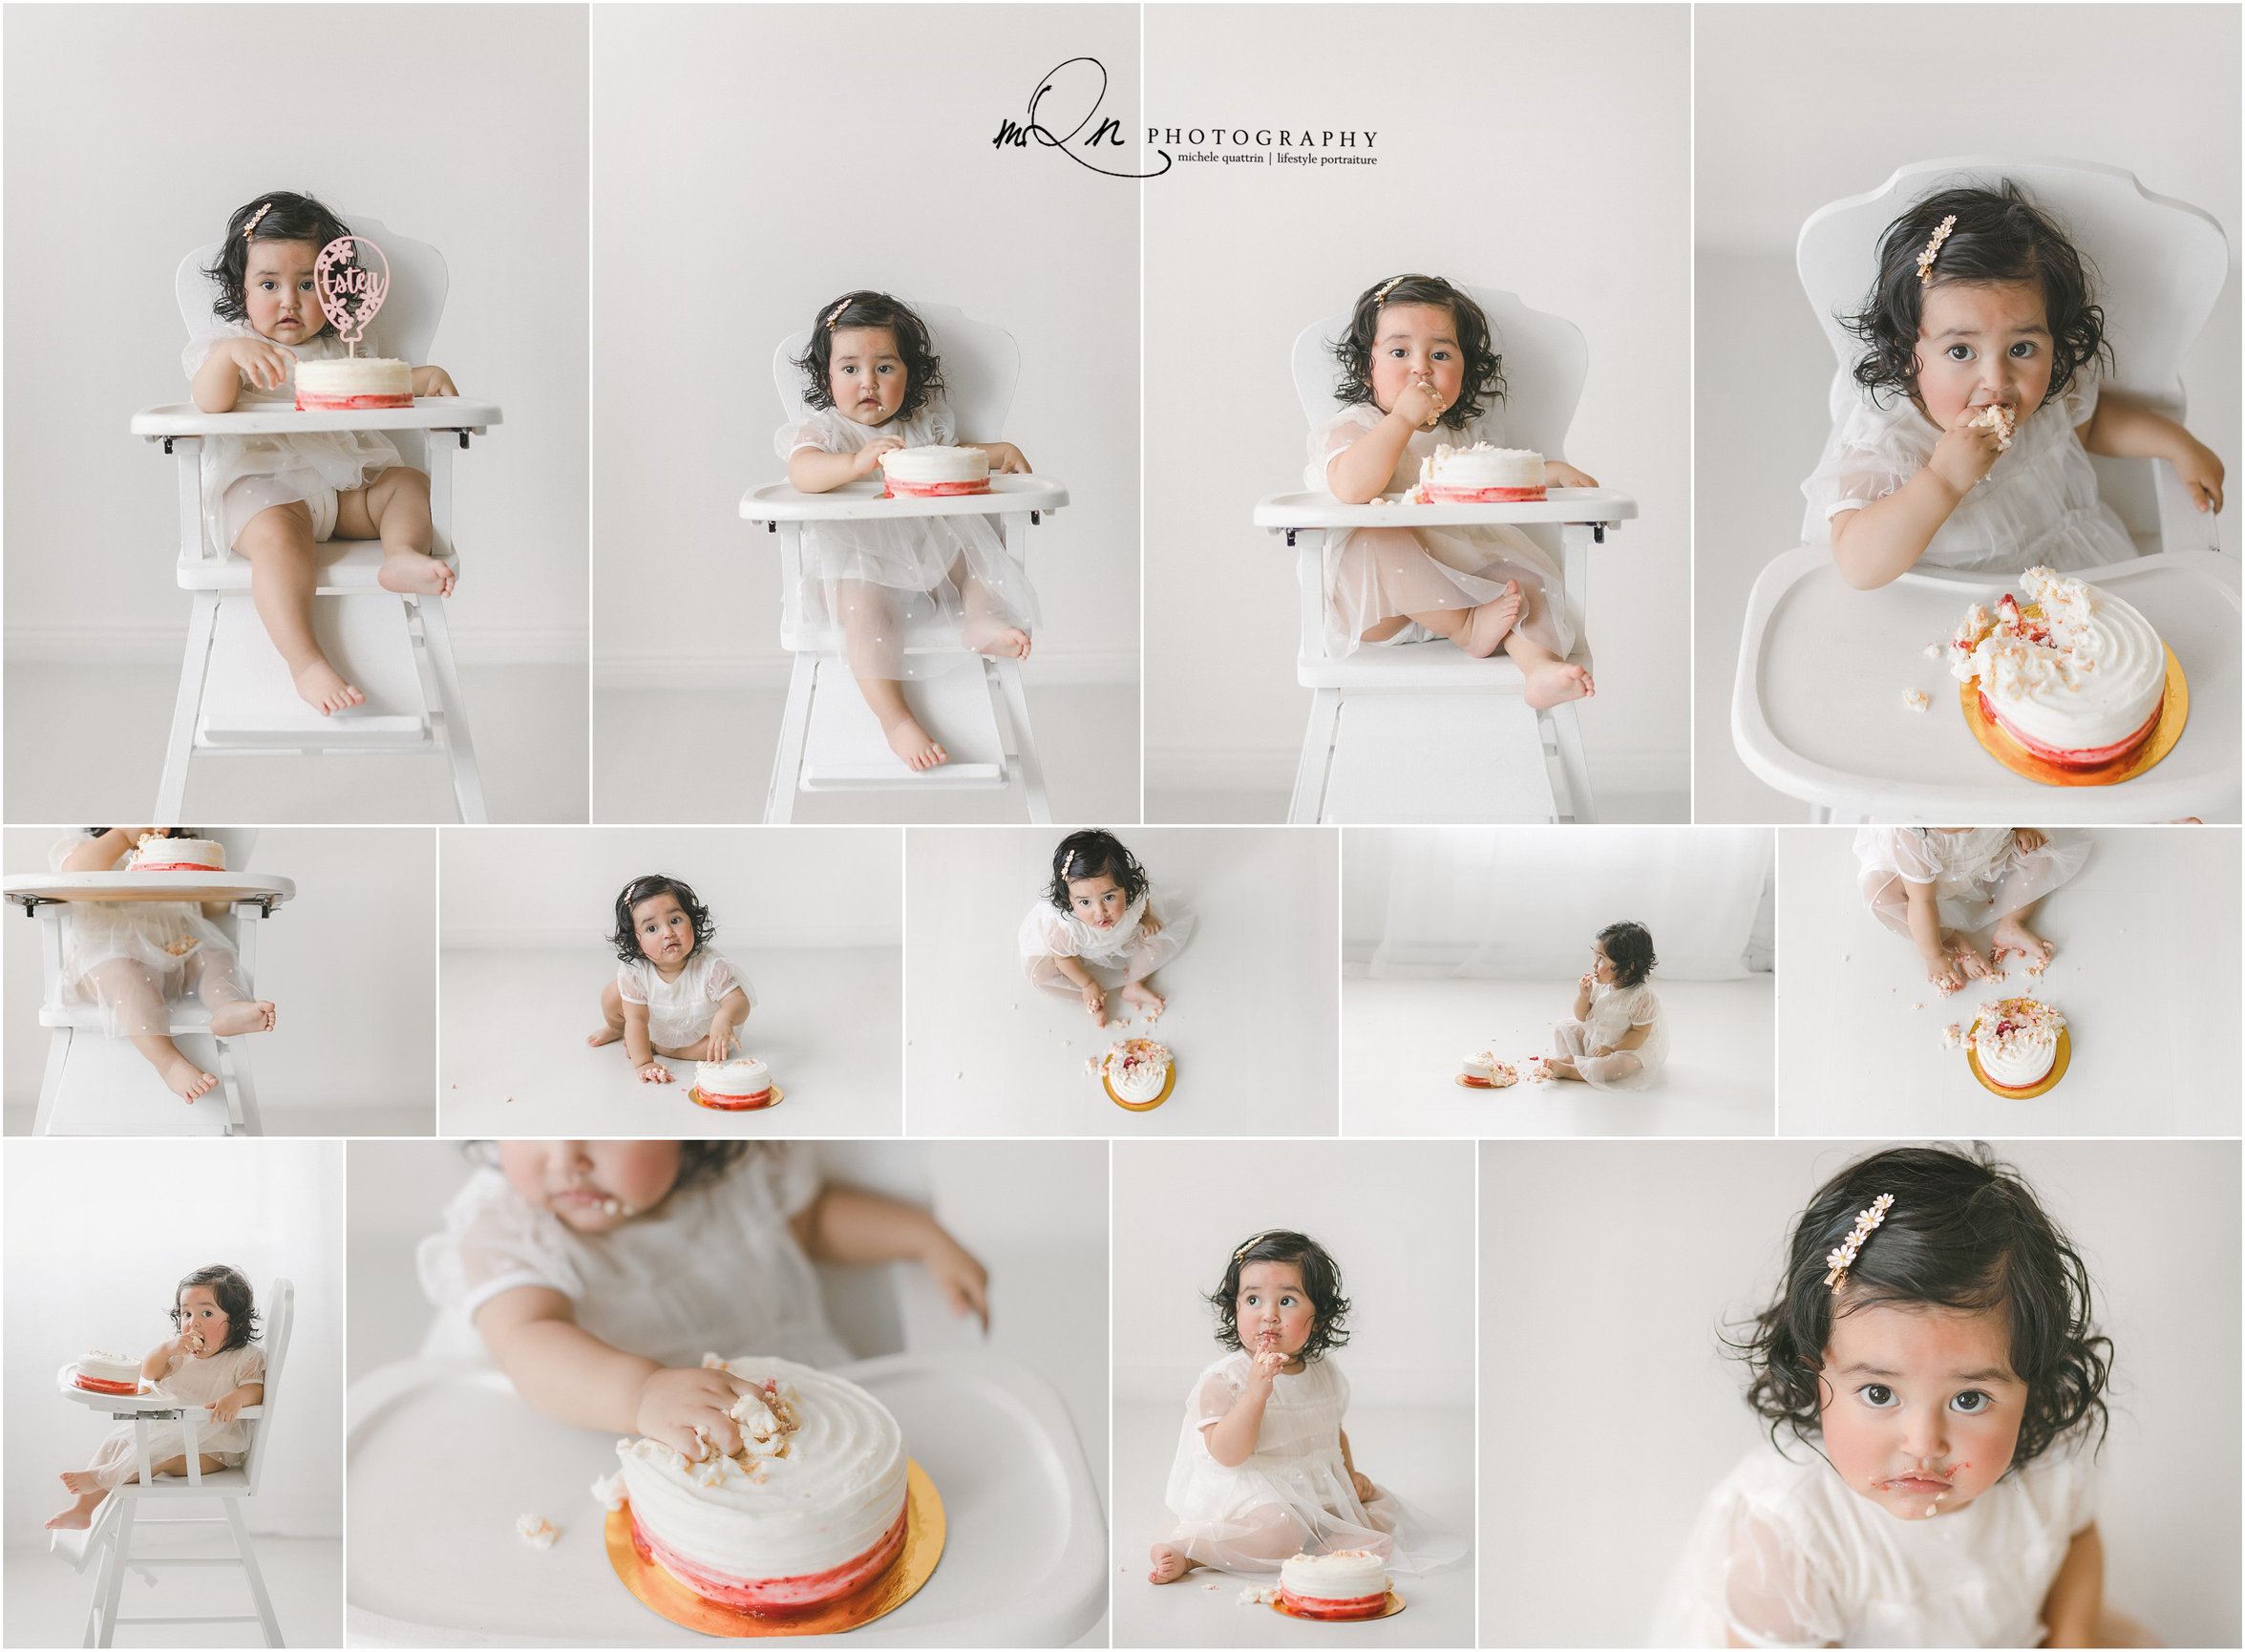 Planning Your Baby's Cake Smash Session